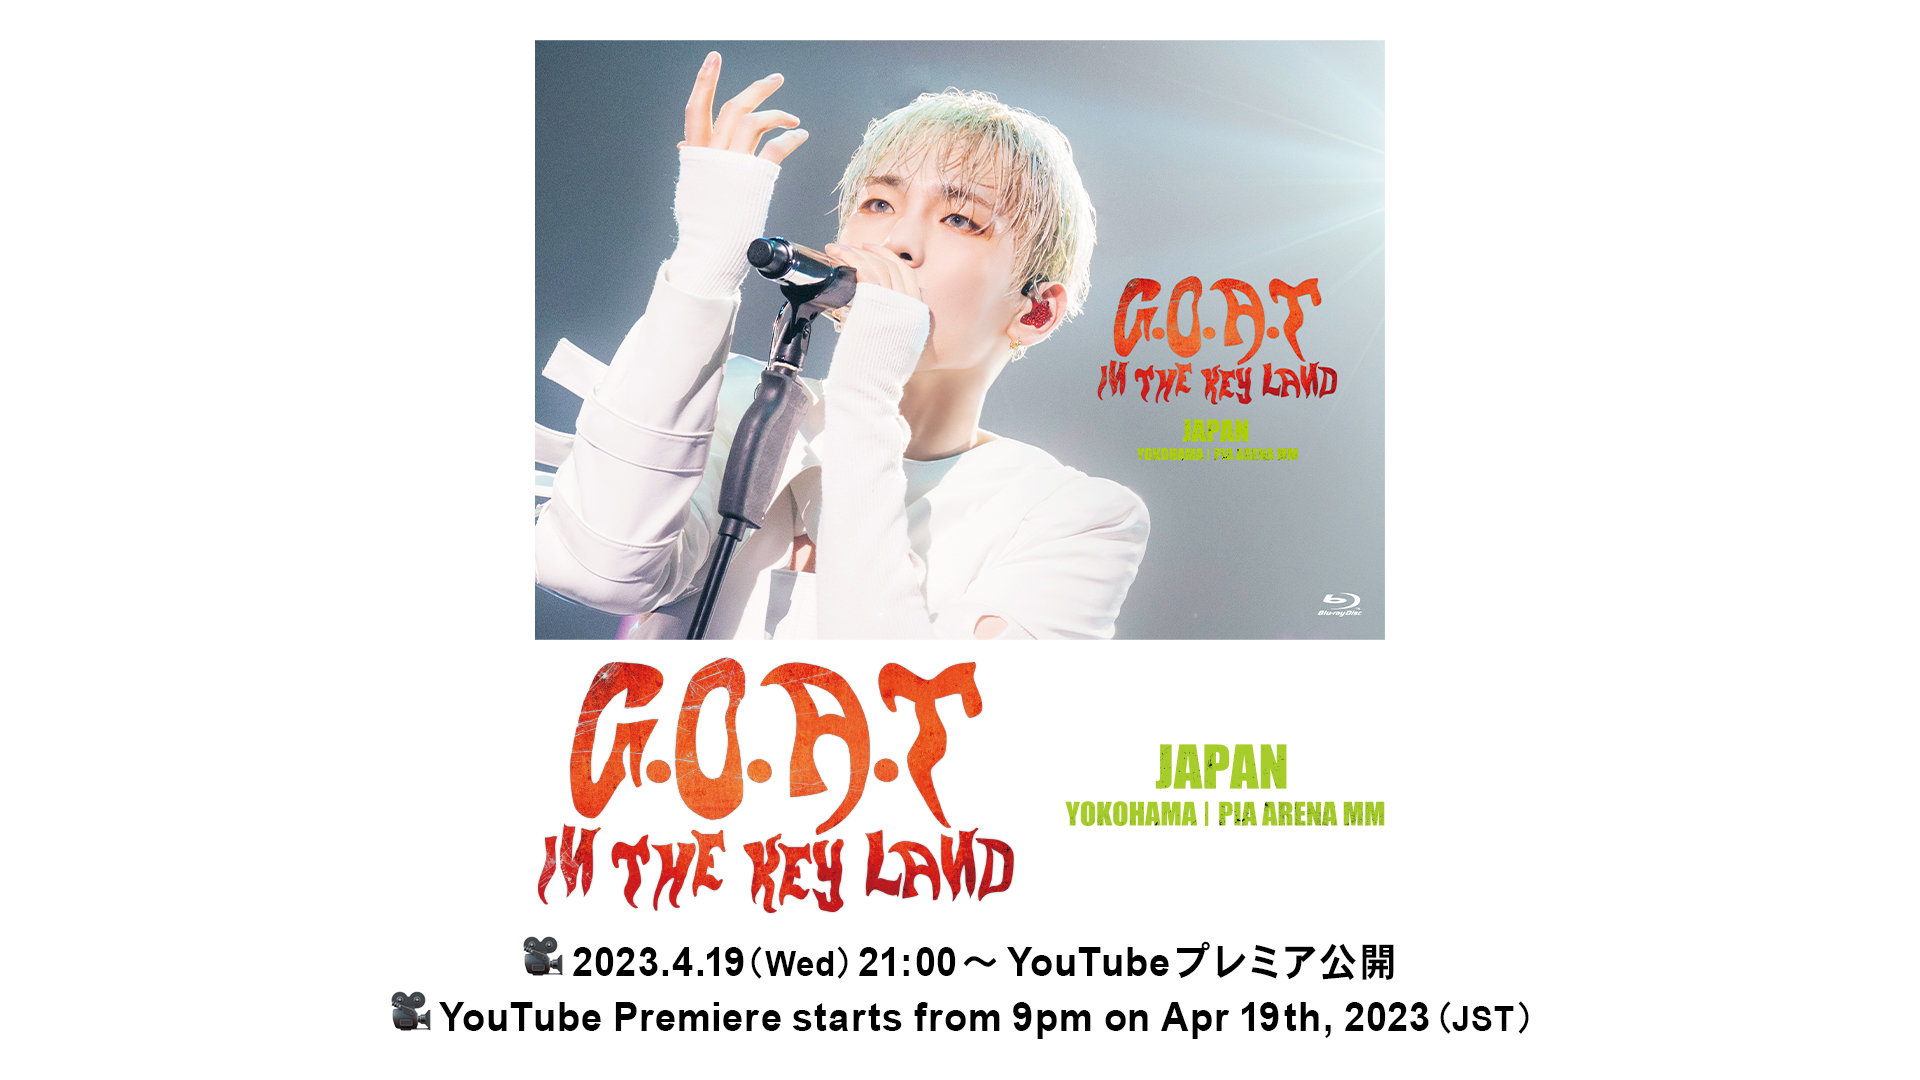 KEY LIVE Blu-rayDVD「KEY CONCERT (Greatest Of All Time) IN THE KEYLAND  JAPAN」本編映像冒頭30分をノーカットでYouTubeプレミア公開！ SHINee OFFICIAL WEBSITE